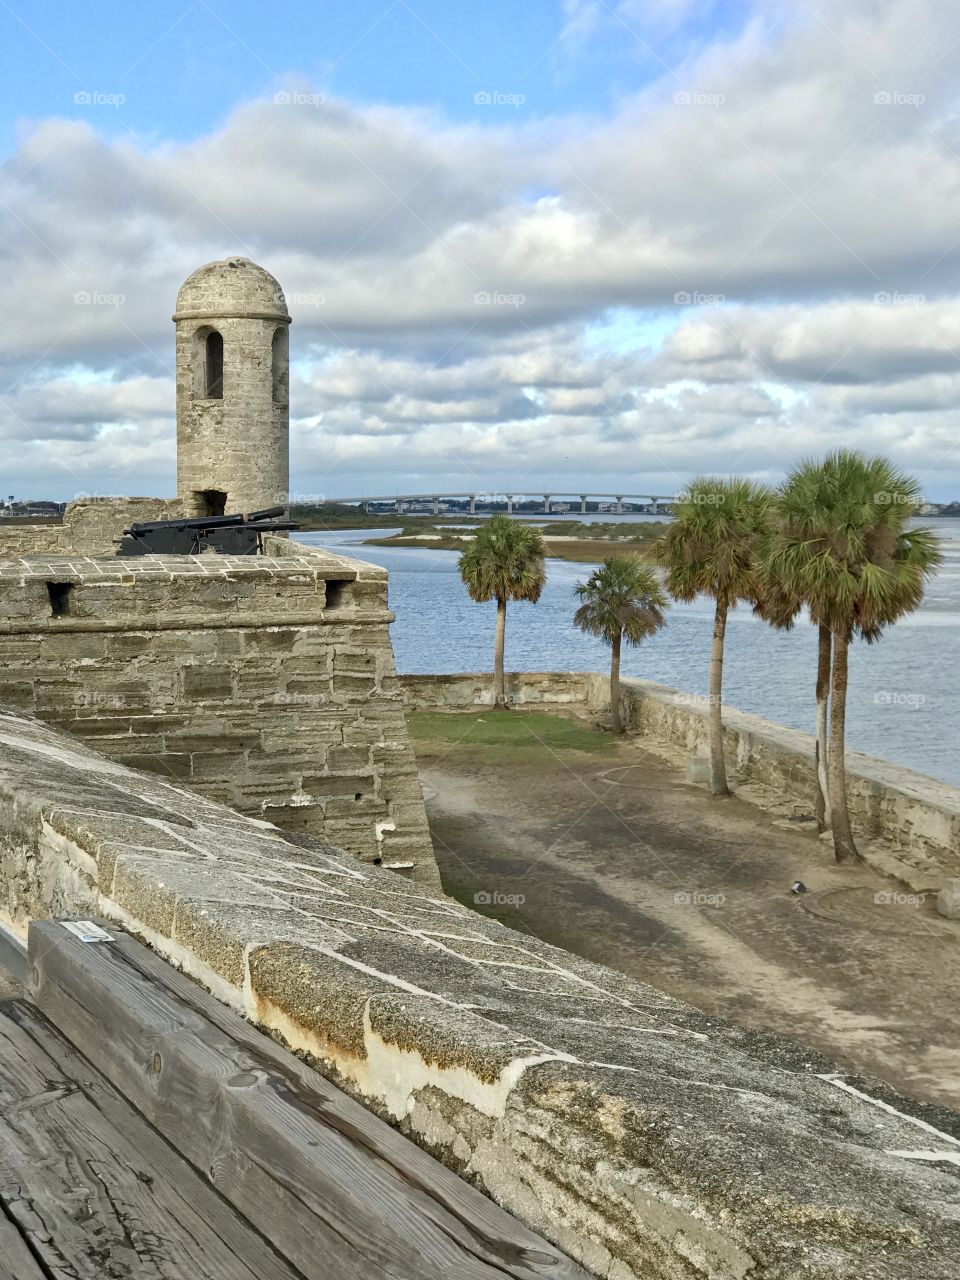 Beautiful view of the Historical Fort guarding the first city in St. Augustine, Florida along a calm Matanzas Bay